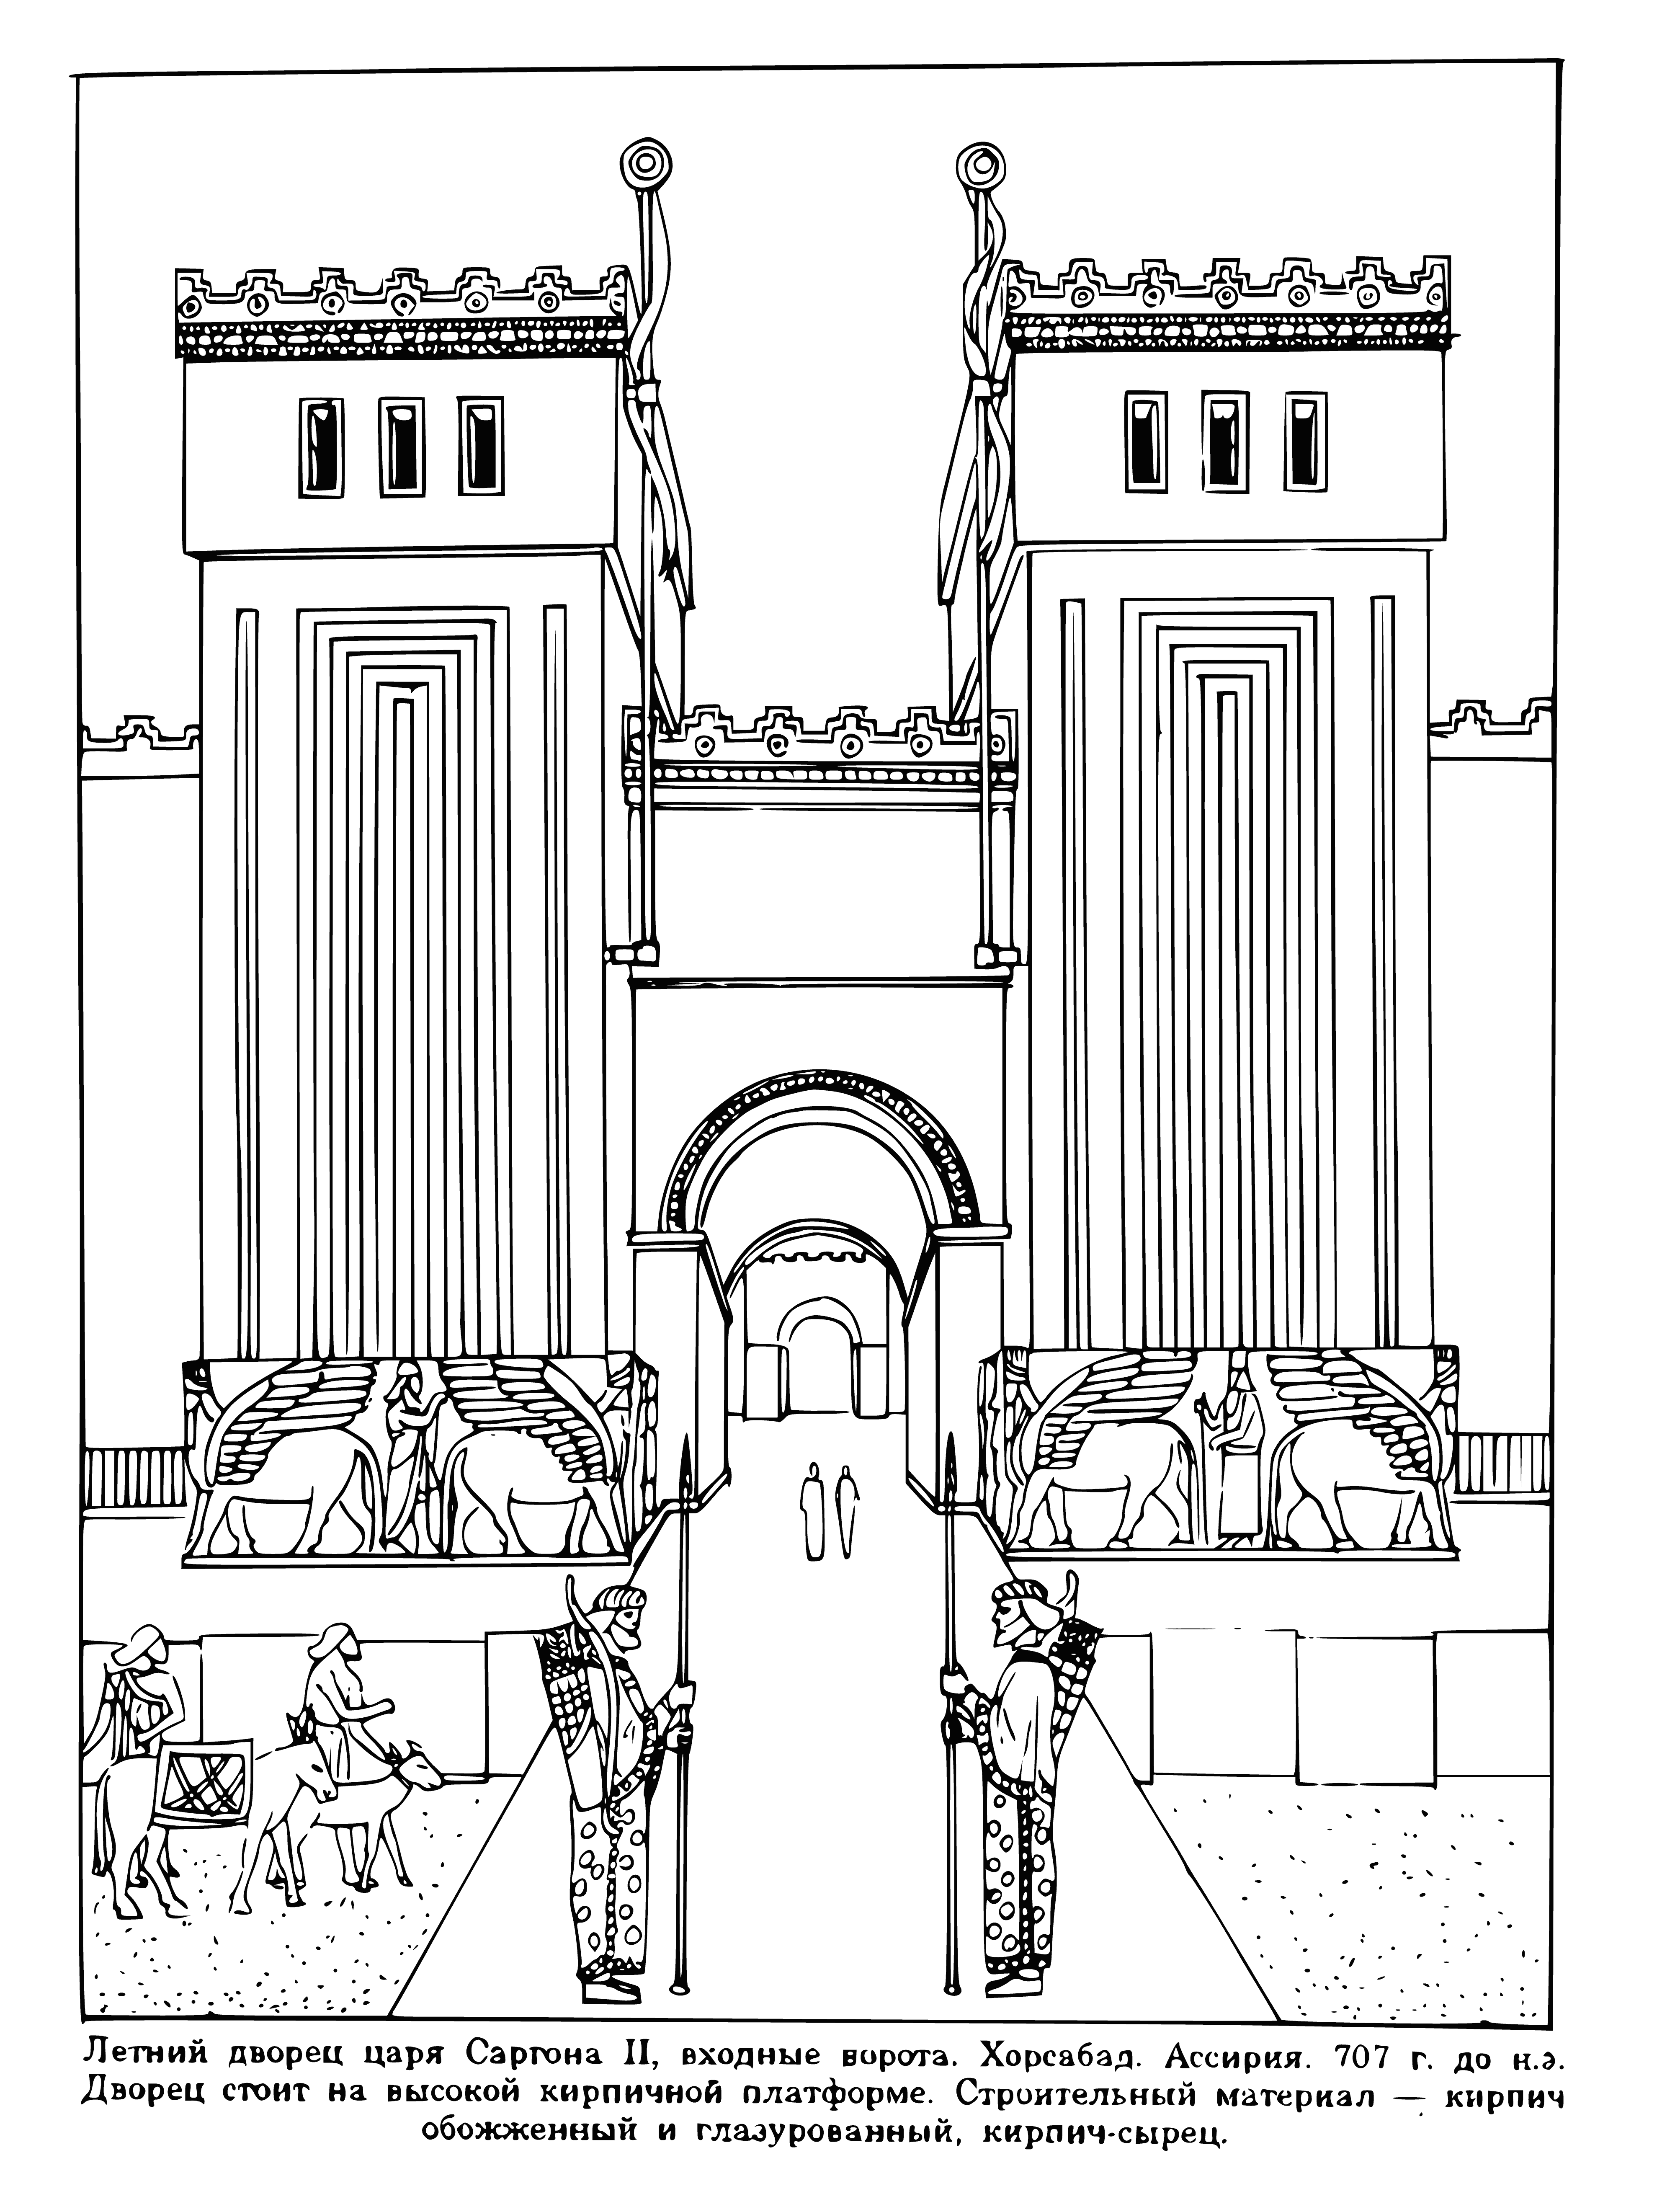 coloring page: Palace of King Sargon built over 4000 yrs ago in Akkad, Mesopotamia; was opulent 10,000+ sq m, made of mud brick & stone, and decorated with lavish reliefs, mosaics & sculptures. Home to king & family, used for state occasions & ceremonies.